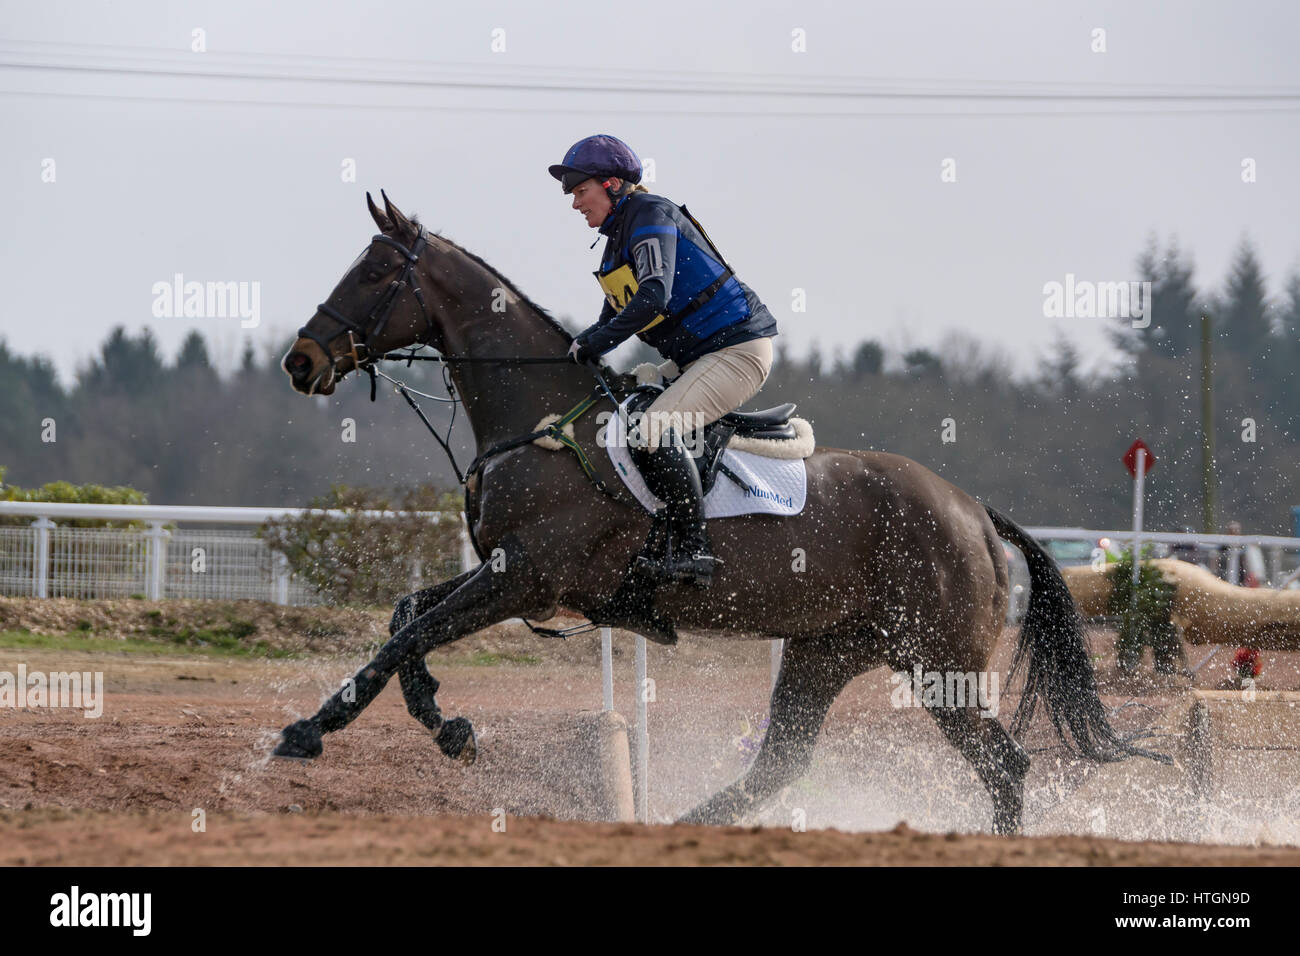 Tweseldown UK. 11th March 2017. Riders from across the country compete in the BE horse trials. Credit: Scott Carruthers/Alamy Live News Stock Photo